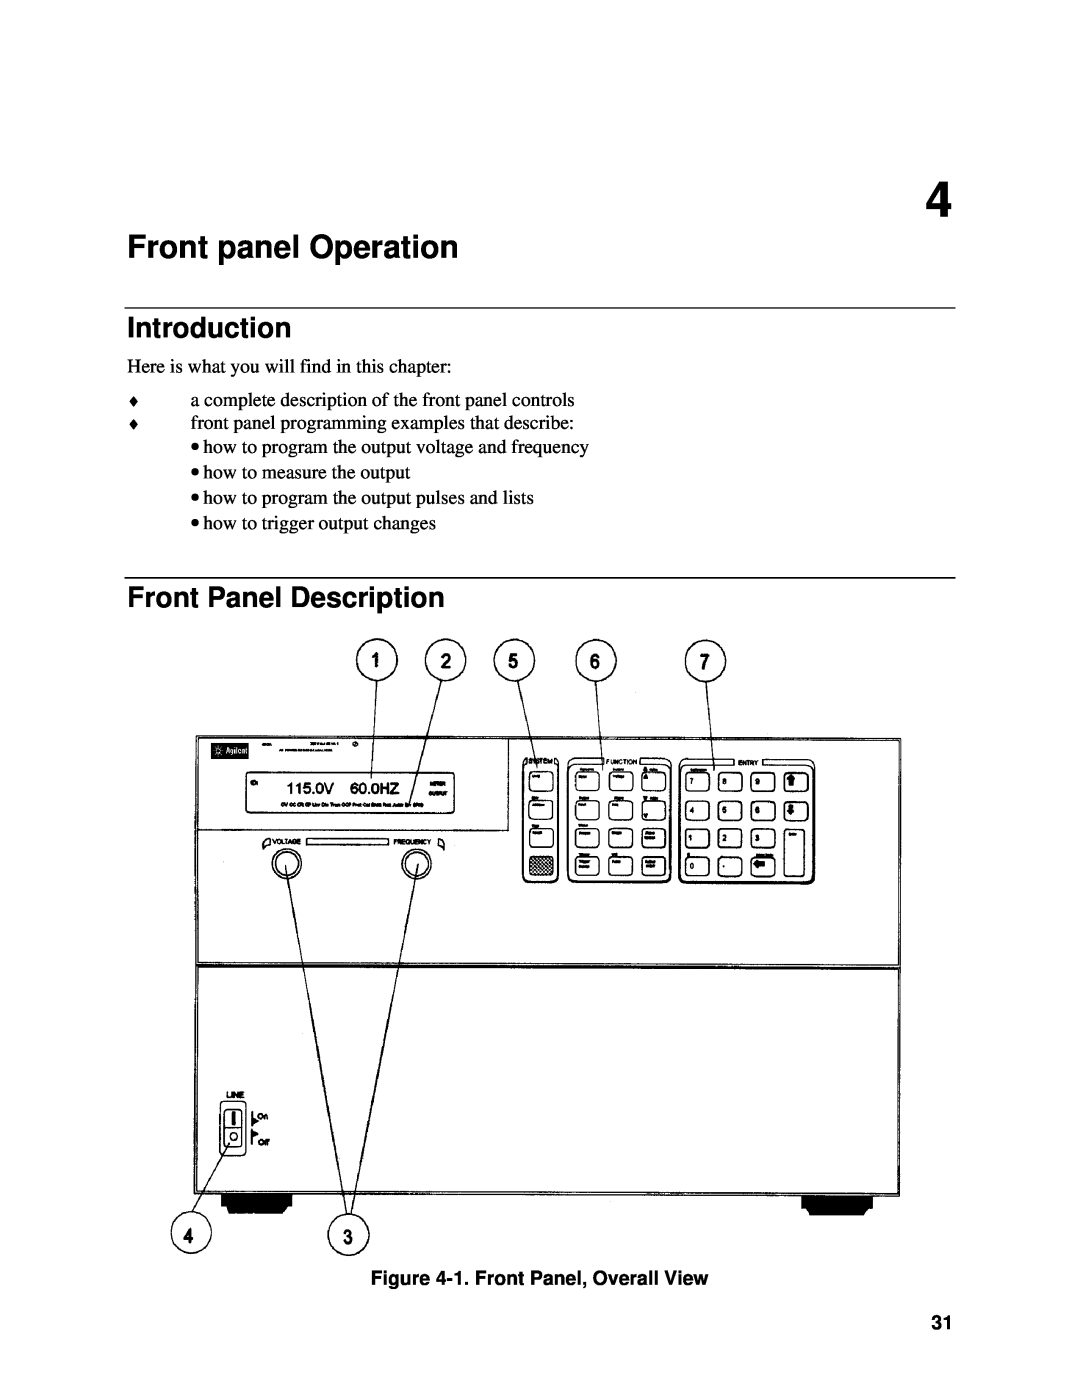 Agilent Technologies 6814B manual Front panel Operation, Front Panel Description, 1.Front Panel, Overall View, Introduction 